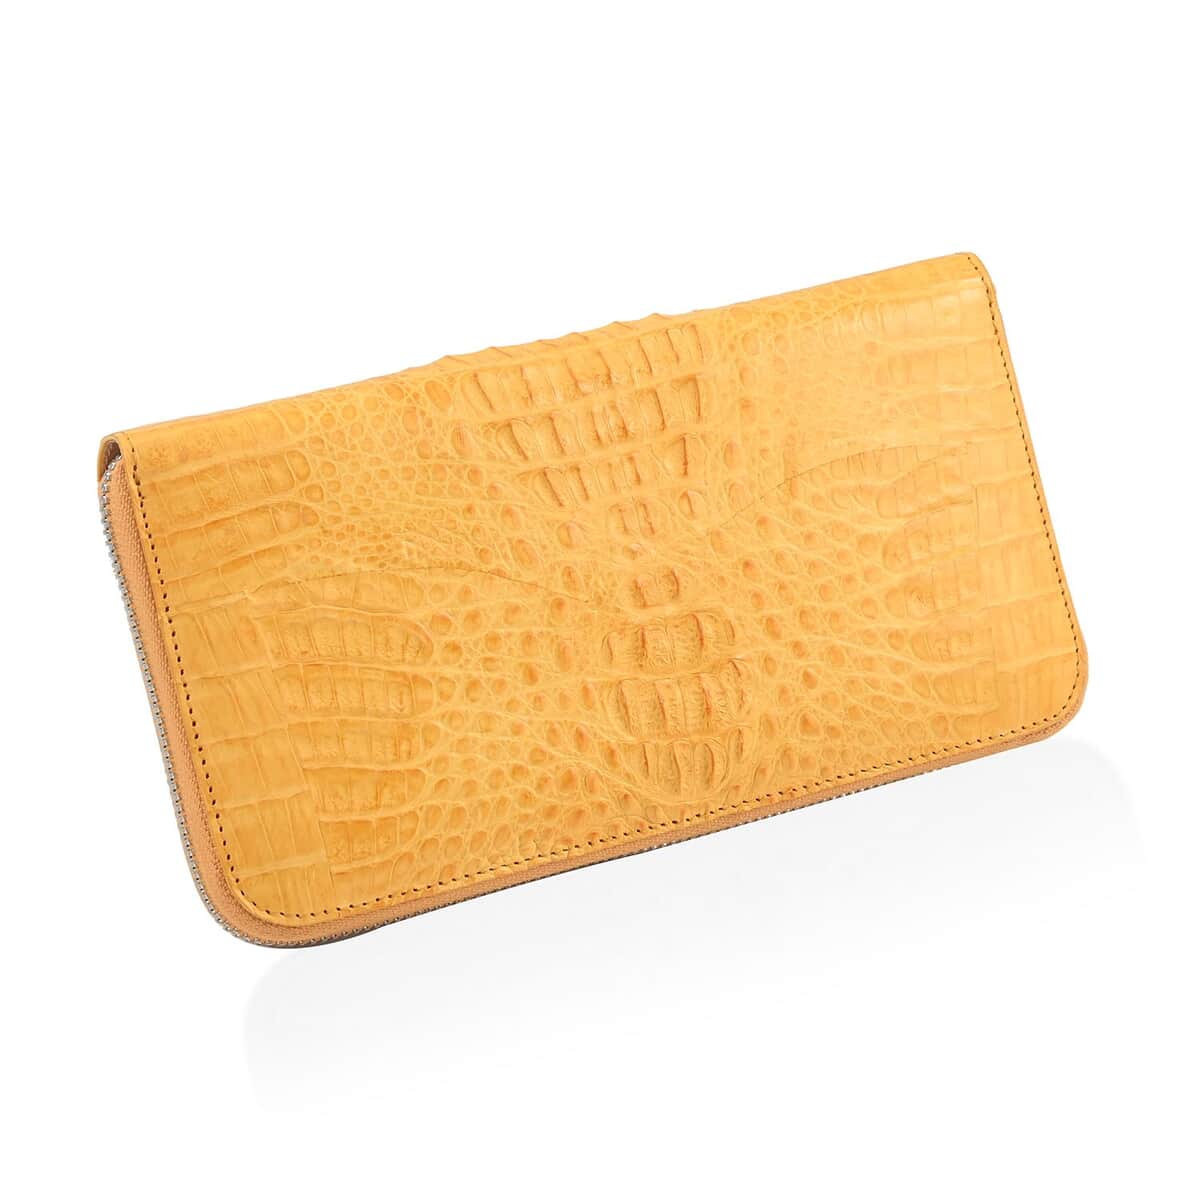 Closeout Brand River Yellow Genuine Crocodile Leather Clutch Bag , Clutches for Women , Leather Handbag , Clutch Purse image number 0